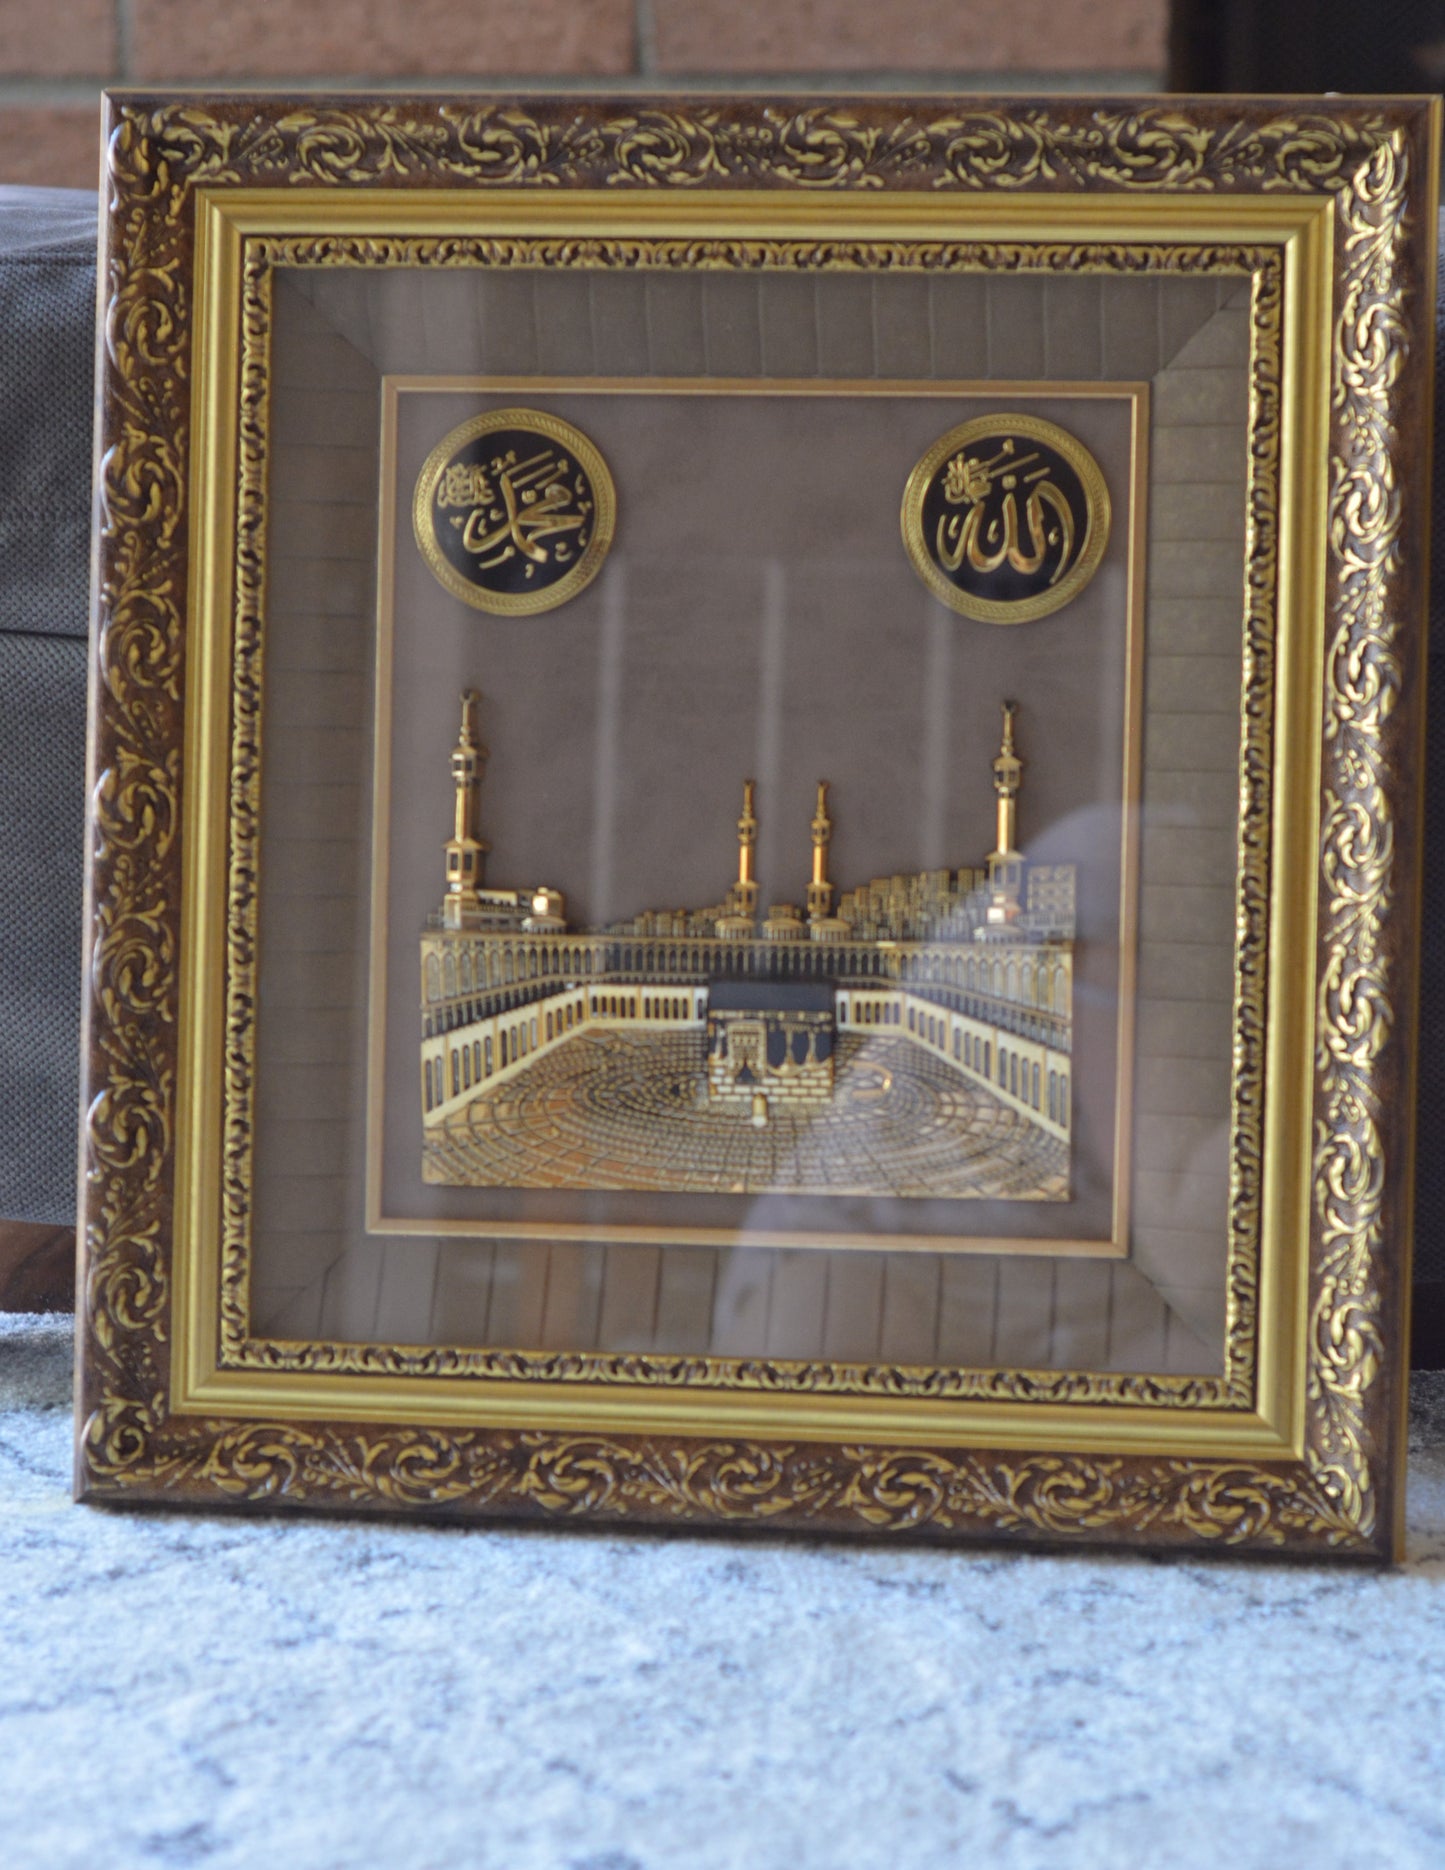 Kabaa Mecca Frame 20.5"x19" Two Colors